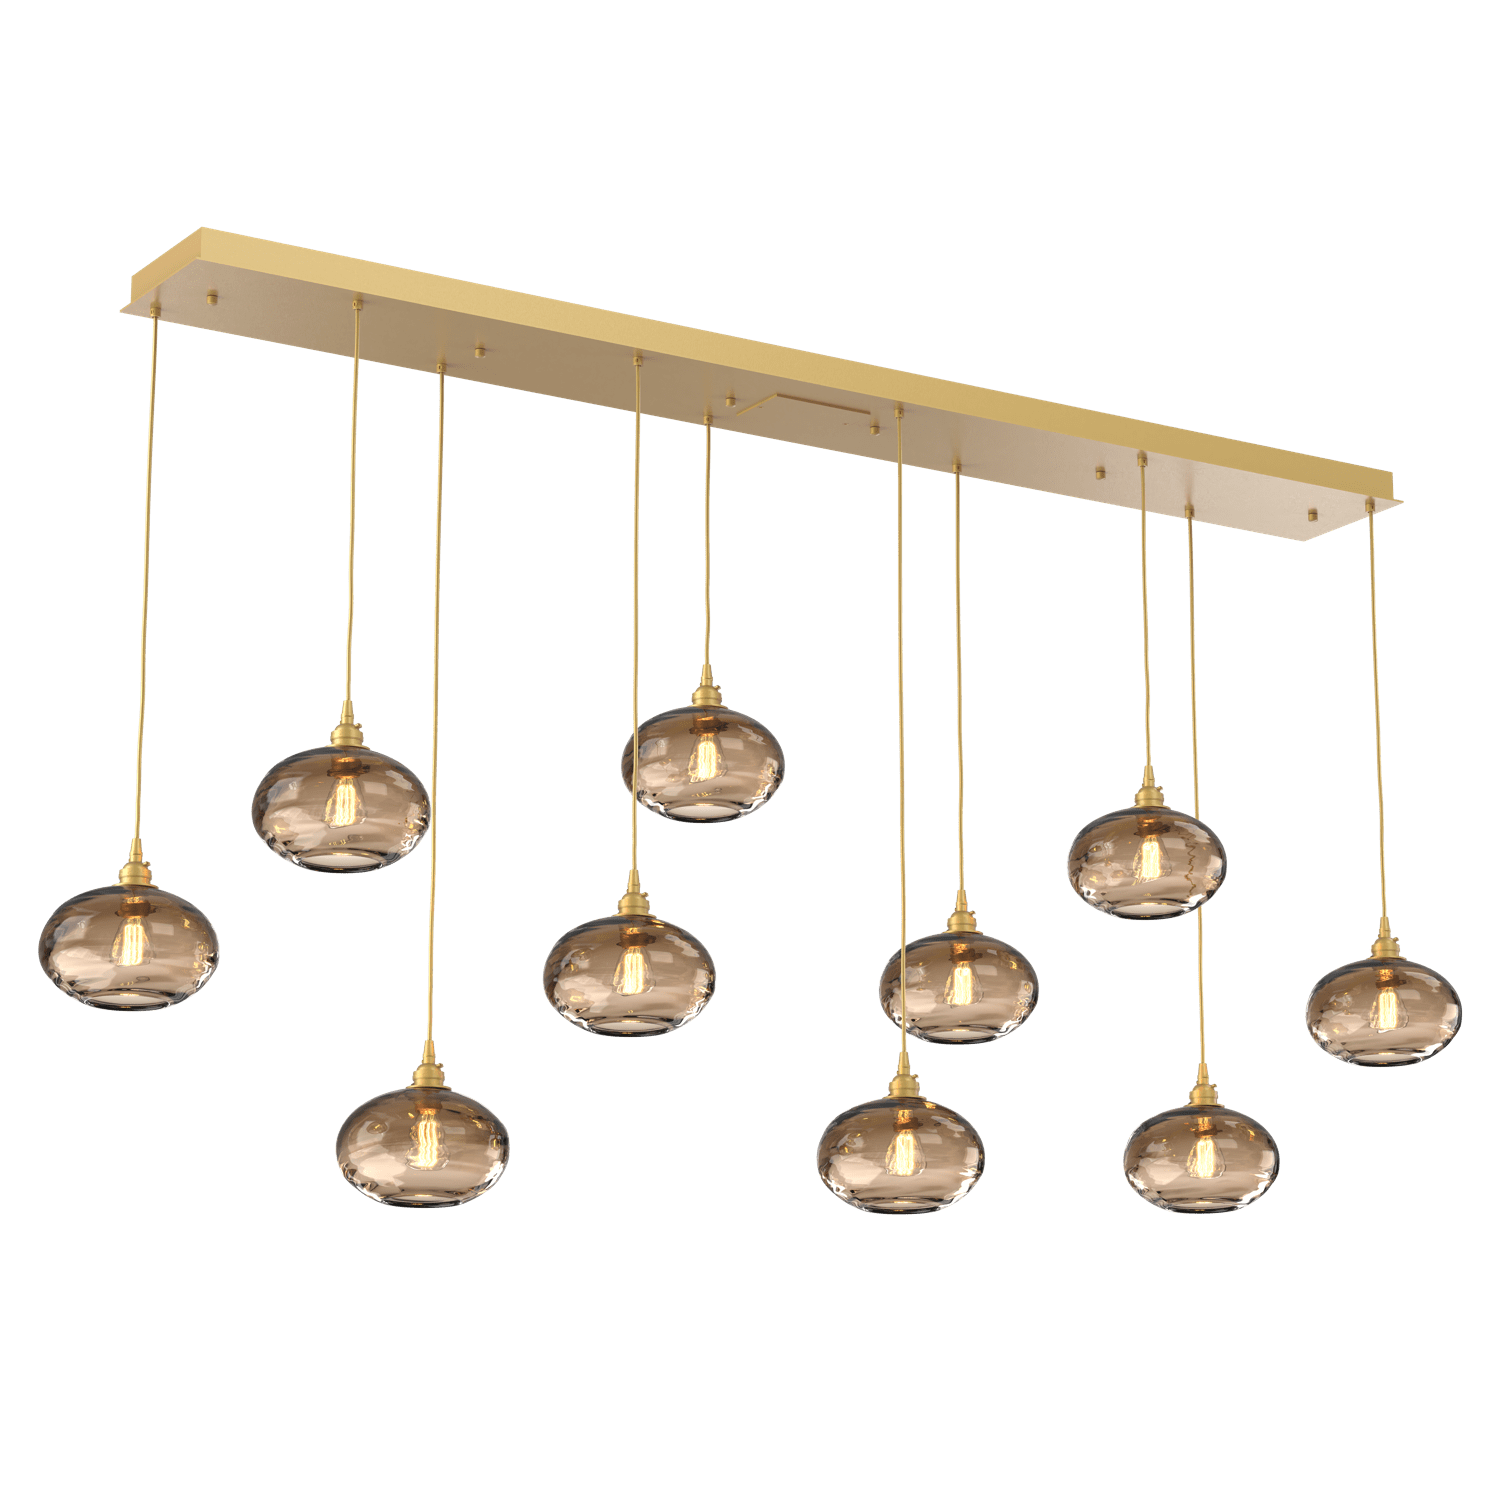 PLB0036-10-GB-OB-Hammerton-Studio-Optic-Blown-Glass-Coppa-10-light-linear-pendant-chandelier-with-gilded-brass-finish-and-optic-bronze-blown-glass-shades-and-incandescent-lamping